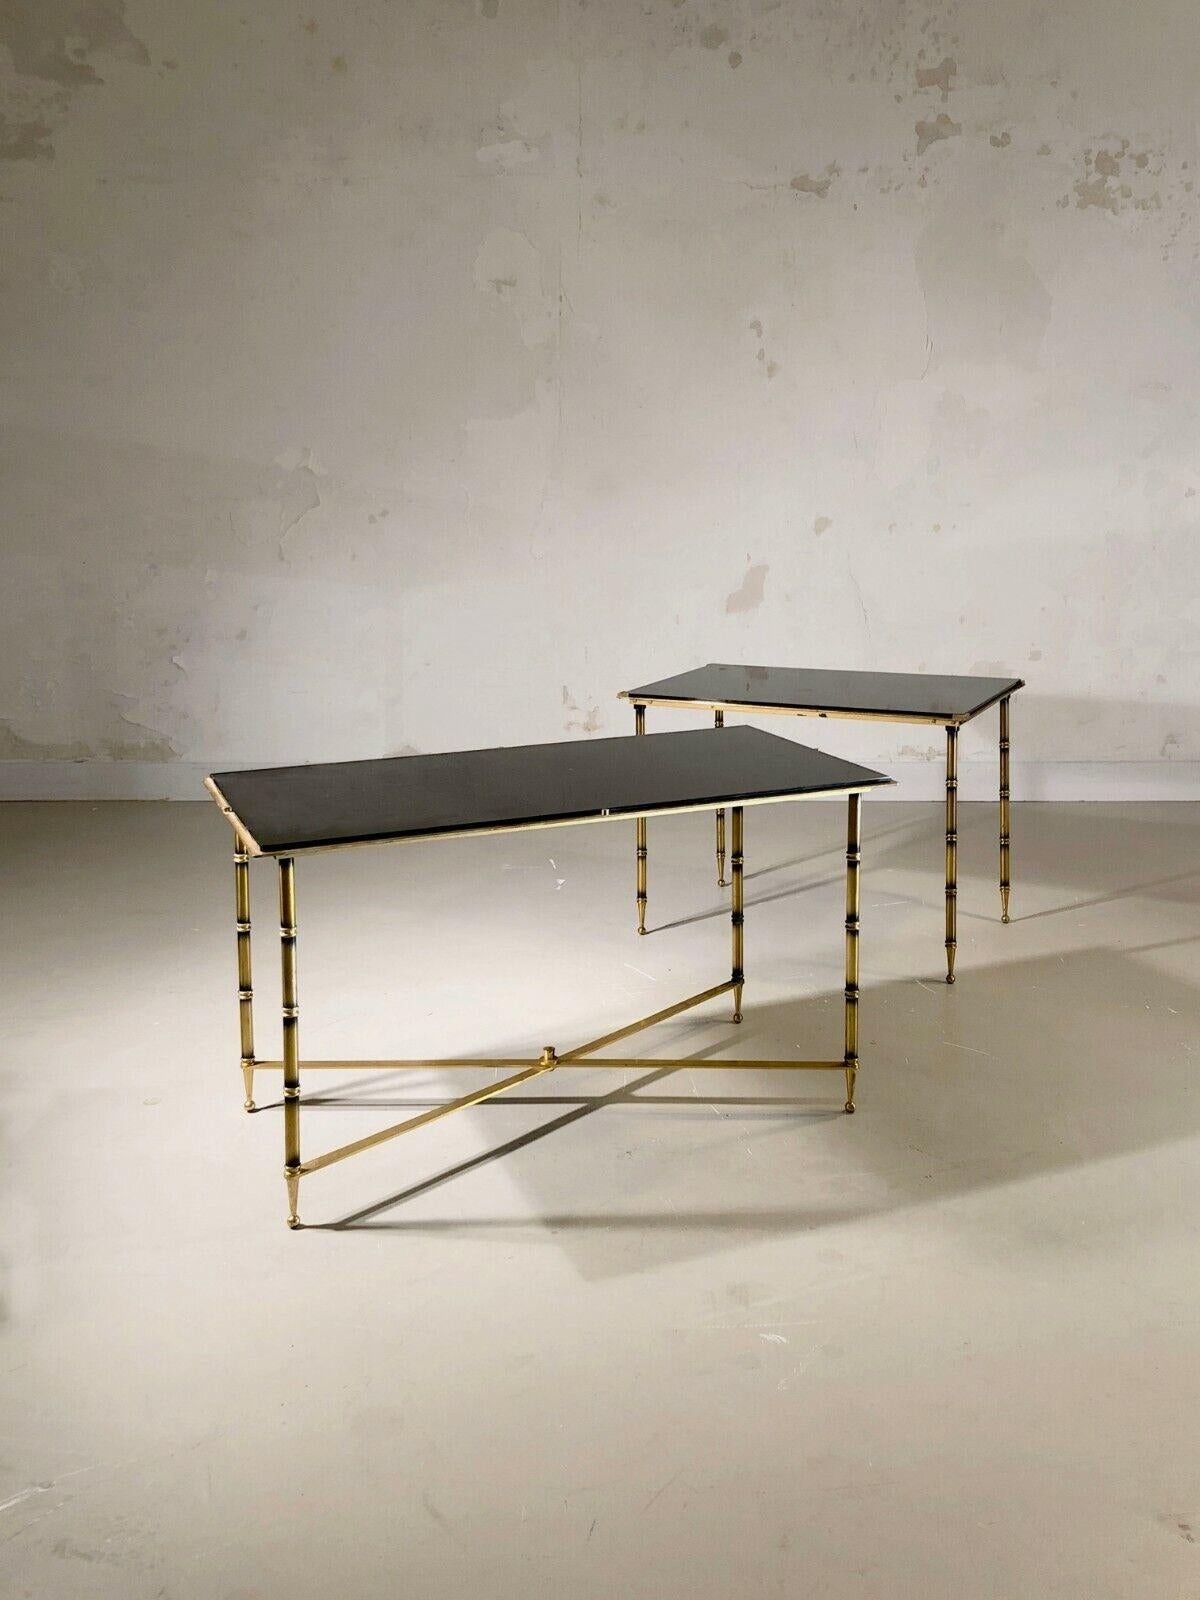 A luxurious asymmetrical pair of coffee or side tables or rectangular bedside tables, Art-Deco, Neo-Classical, Shabby-Chic, rectangular structures in patinated gilded bronze with bamboo-style legs, original black opaline glass top simply wedged by 4